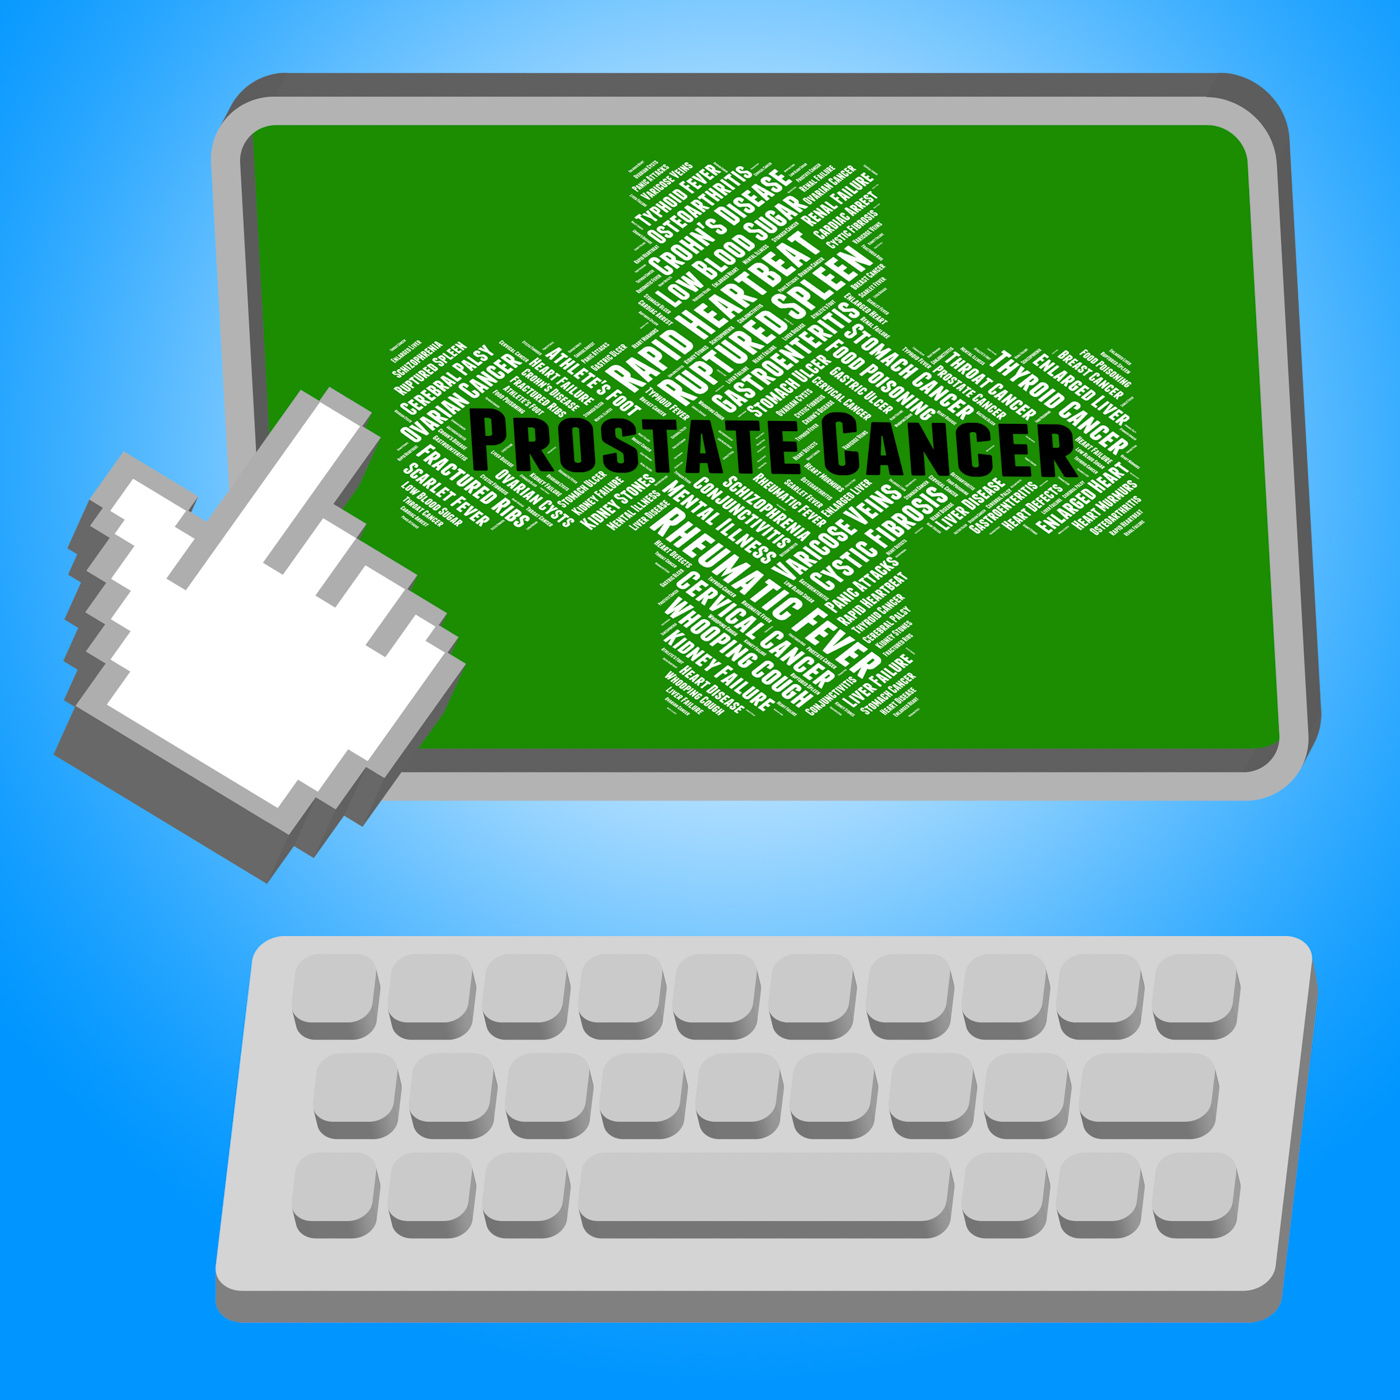 Prostate Cancer Indicates Poor Health And Affliction, Ill, Tumor, System, Sick, HQ Photo